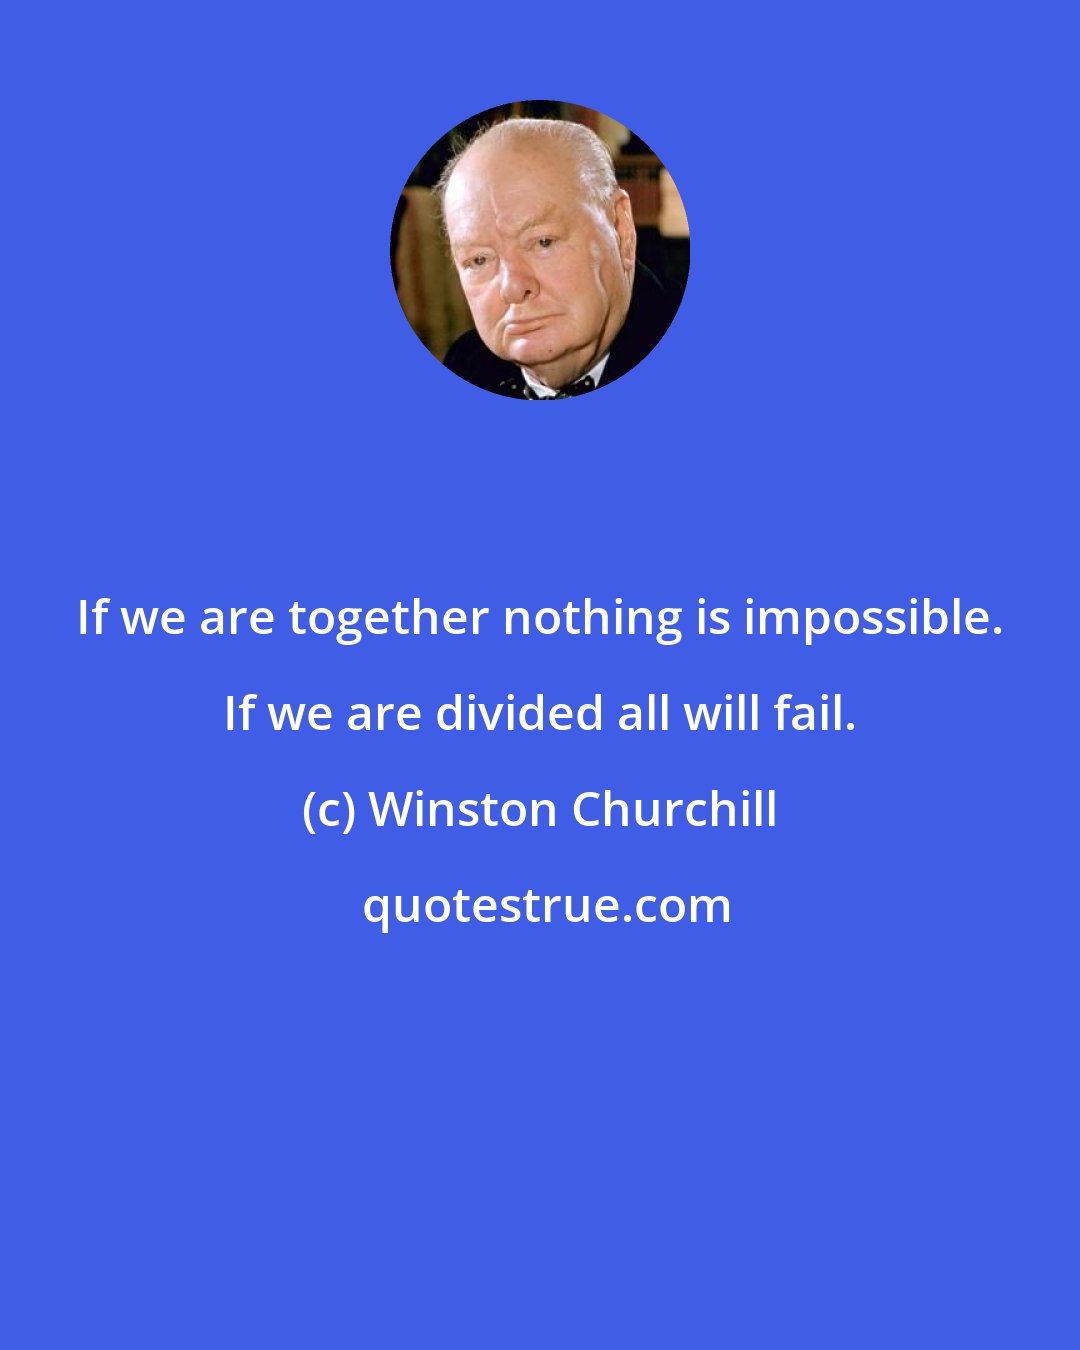 Winston Churchill: If we are together nothing is impossible. If we are divided all will fail.